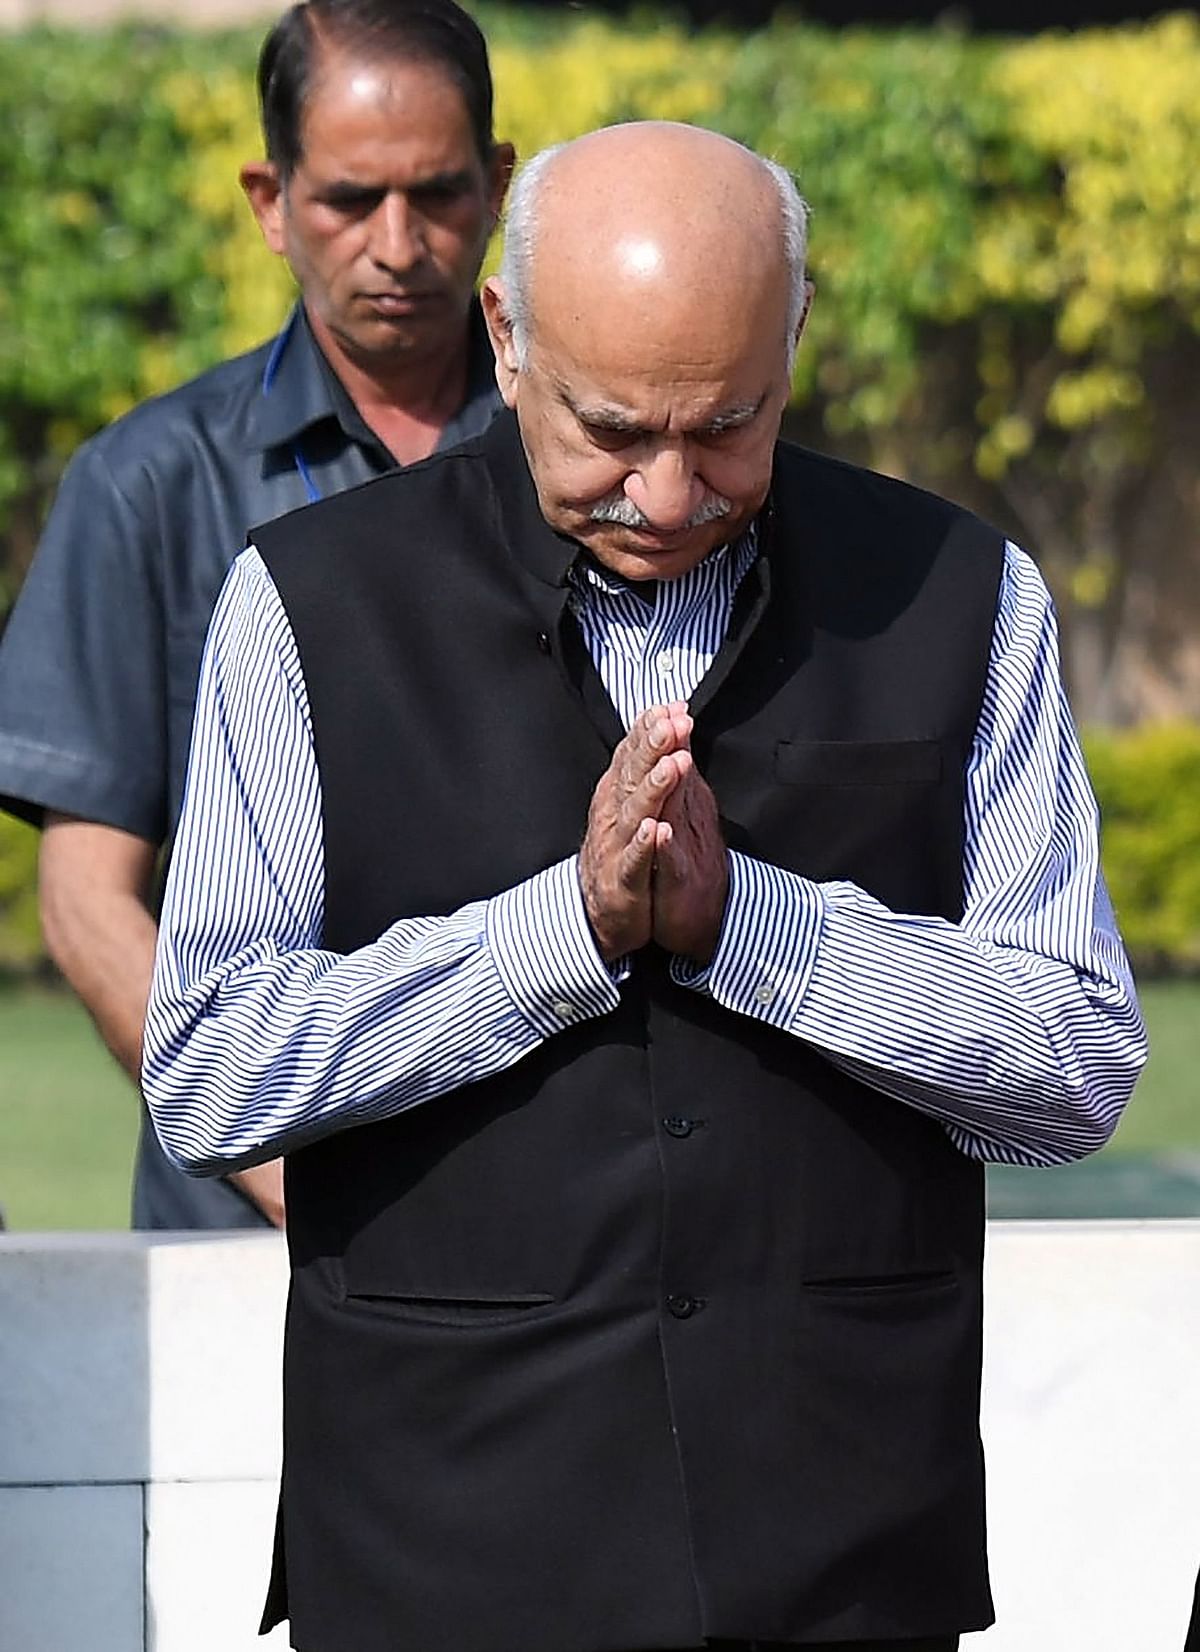 This photo taken on 10 March 2018, shows Indian Minister of State for External Affairs MJ Akbar offering prayers while accompanying French President Emmanuel Macron and his wife Brigitte Macron to their visit to Rajghat, memorial for Mahatama Gandhi in New Delhi. India`s belated #MeToo movement snowballed on 9 October after several female journalists accused a minister in Narendra Modi`s government of sexual harassment and a producer alleged she was raped by a veteran Bollywood actor. Women journalists took to Twitter to allege how MJ Akbar, a well-known former editor and now a junior foreign minister, conducted job interviews in fancy hotel rooms and made sexual advances when they were starting out in the media. -- Photo: AFP